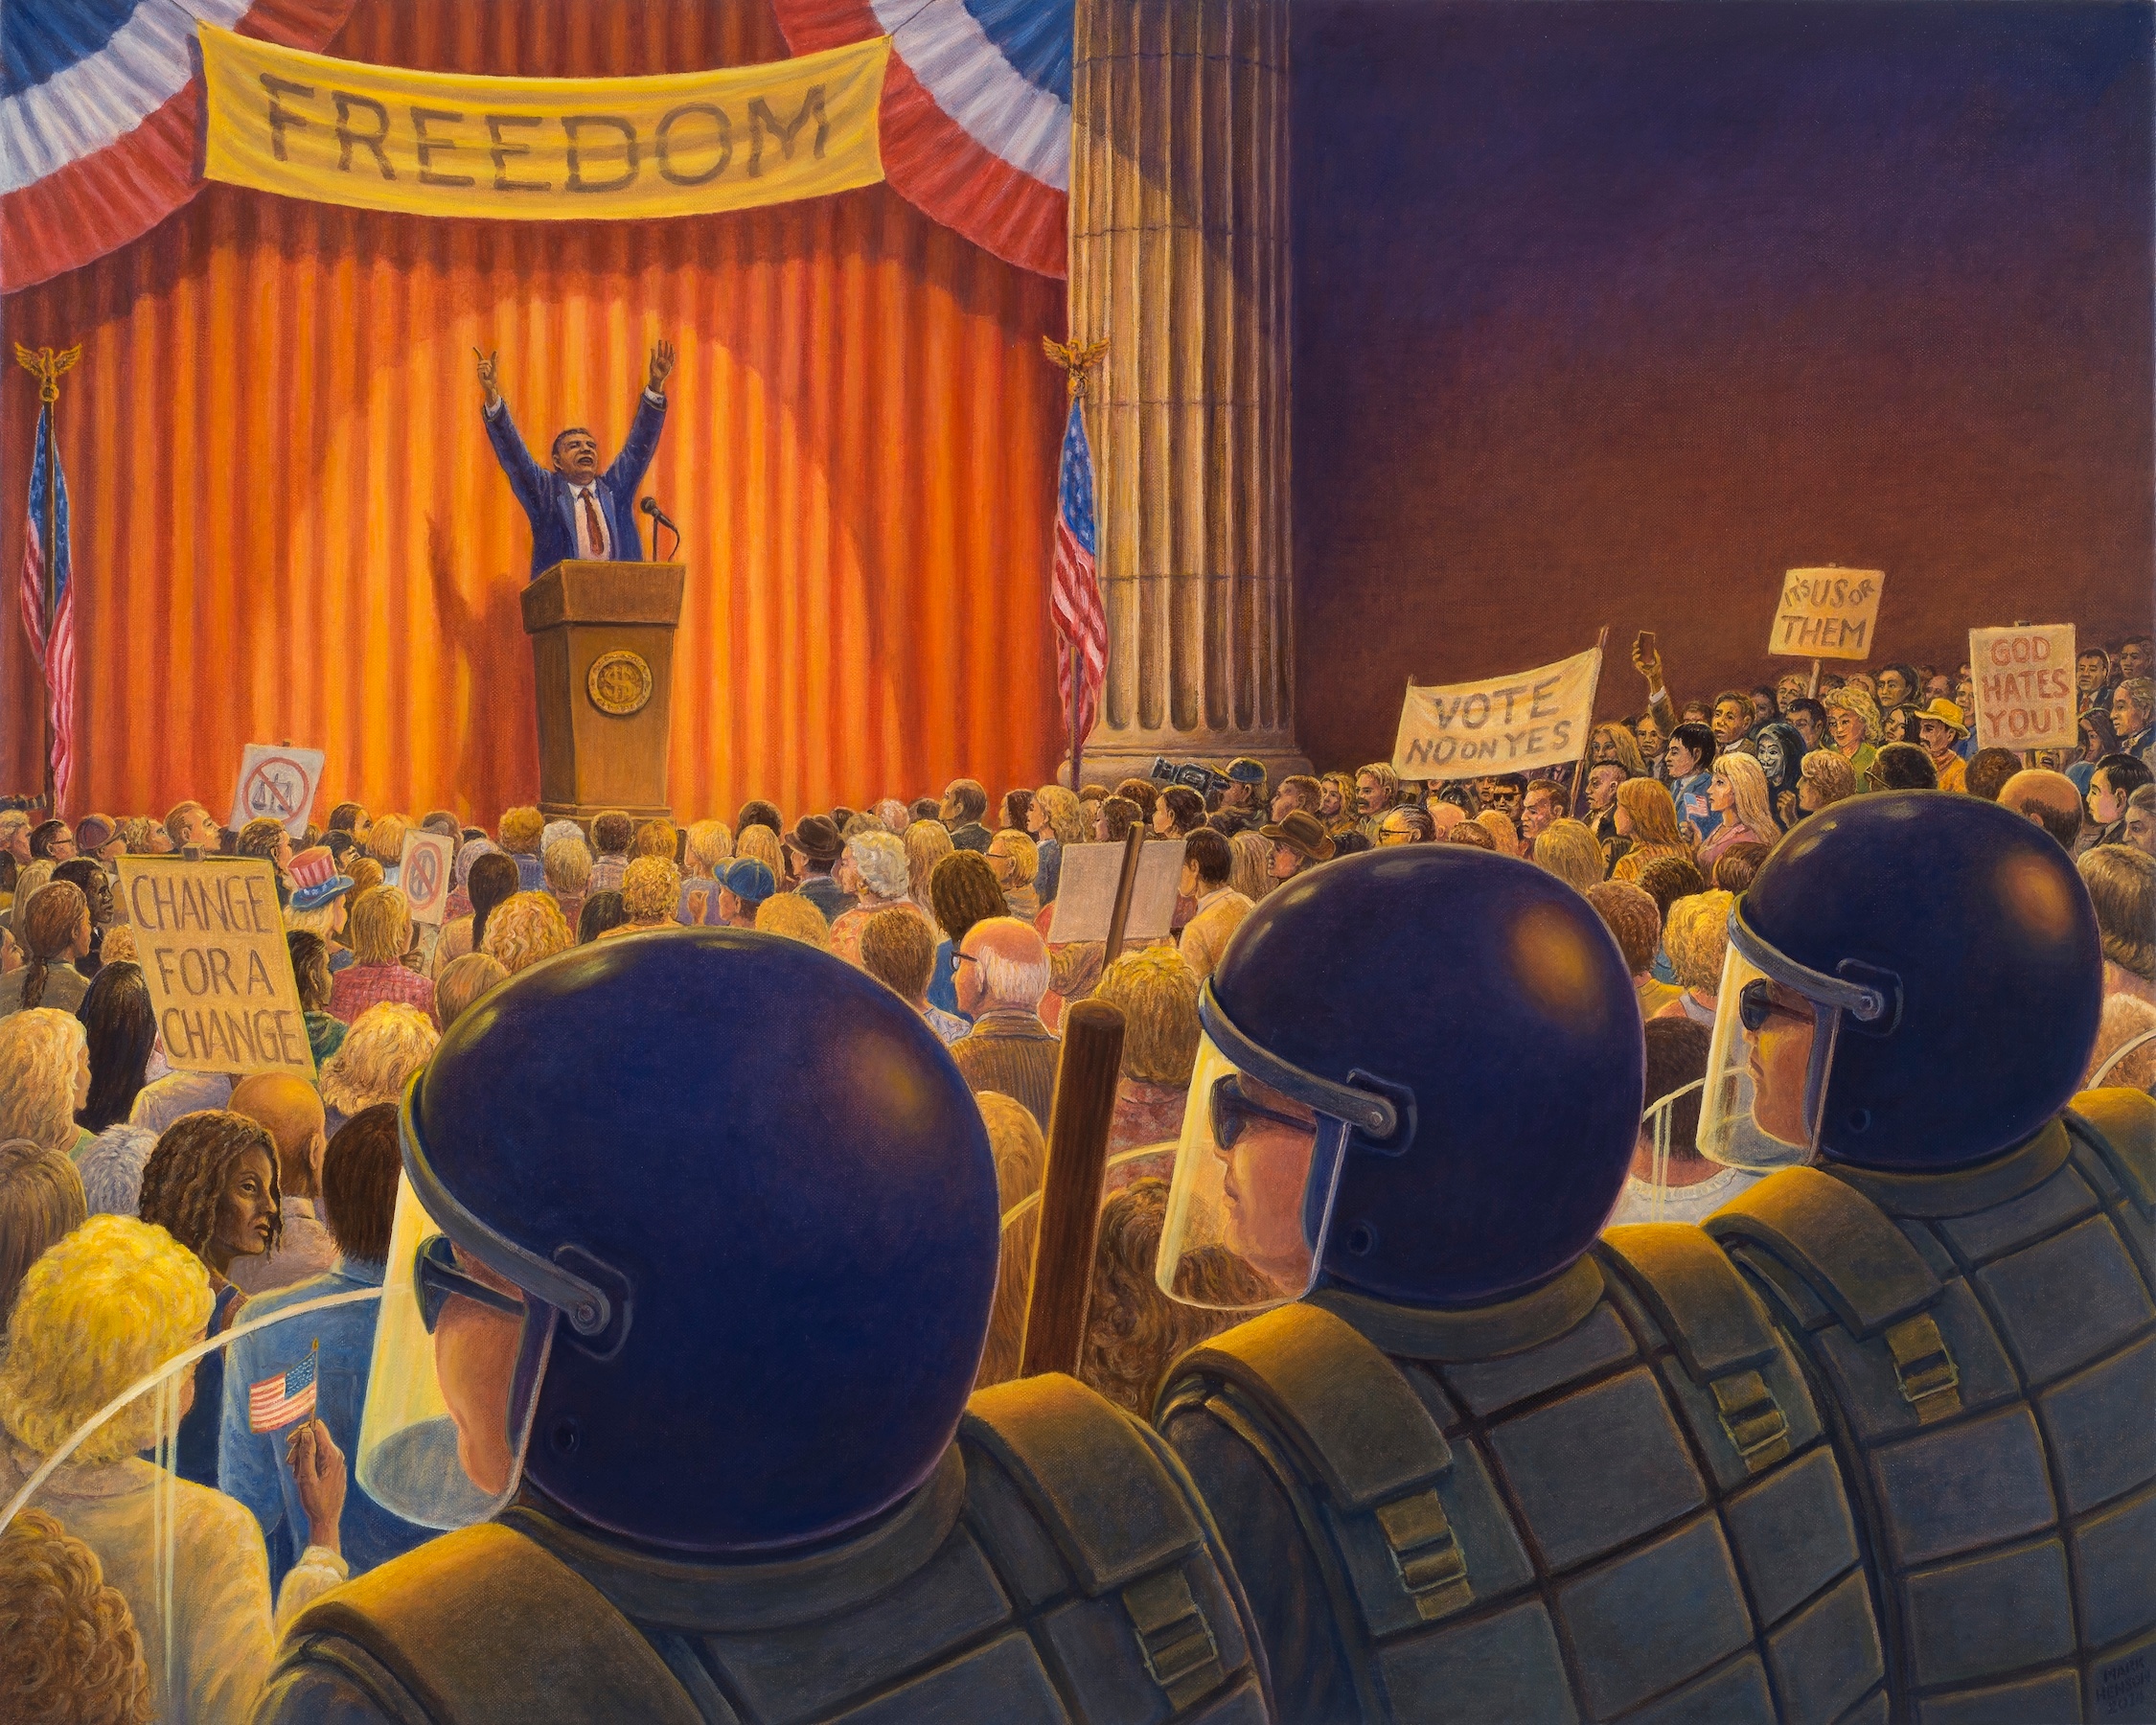 Cost of freedom giclee moemml